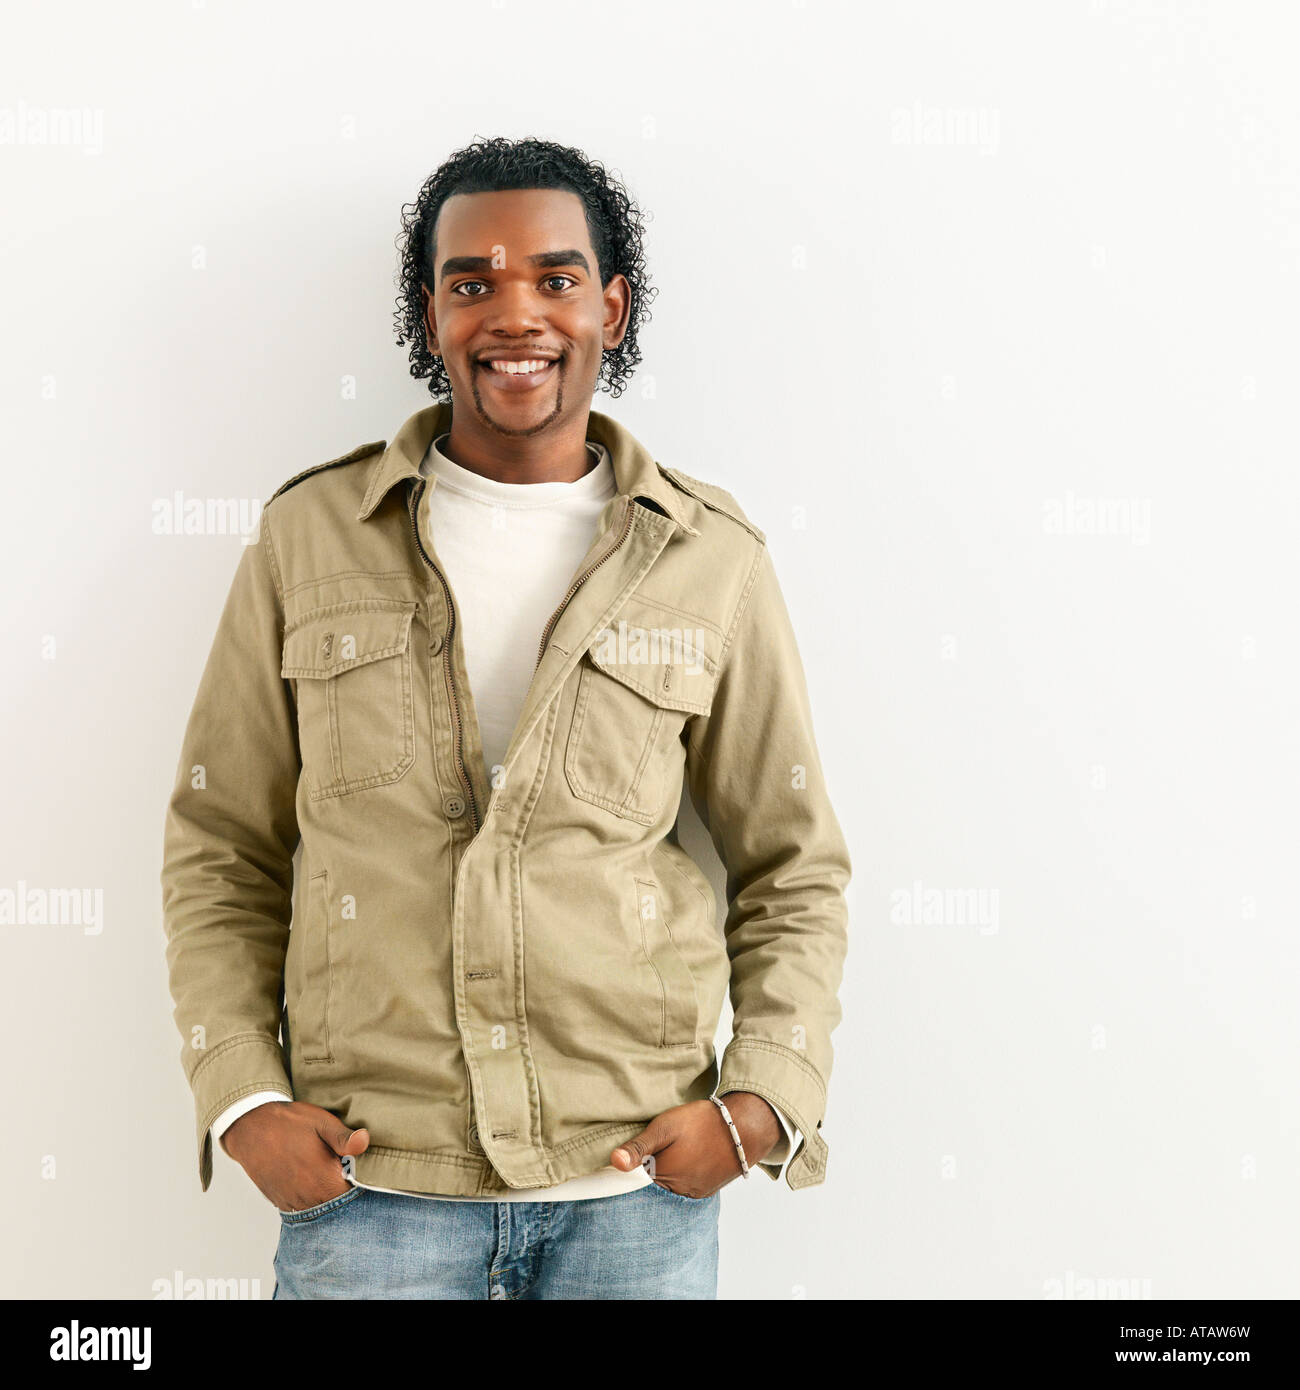 Portrait of smiling man standing against white background Banque D'Images